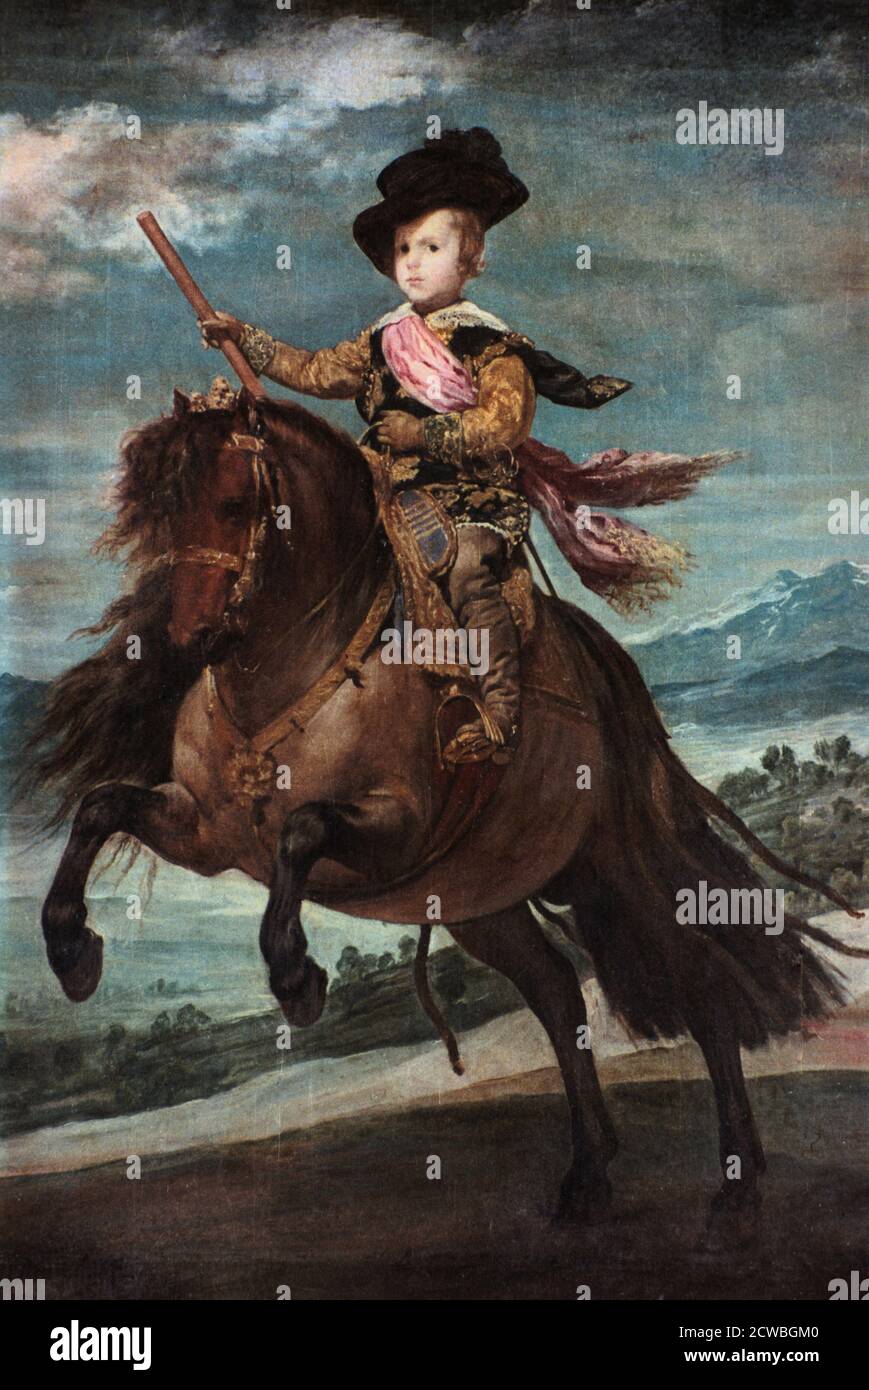 Prince Baltasar Carlos on Horseback,' by Diego Velazquez, 1635-36. Baltasar Carlos was the eldest son of King Philip IV of Spain and his first wife, Elisabeth of France. From the collection of the Museo del Prado, Madrid, Spain. Stock Photo